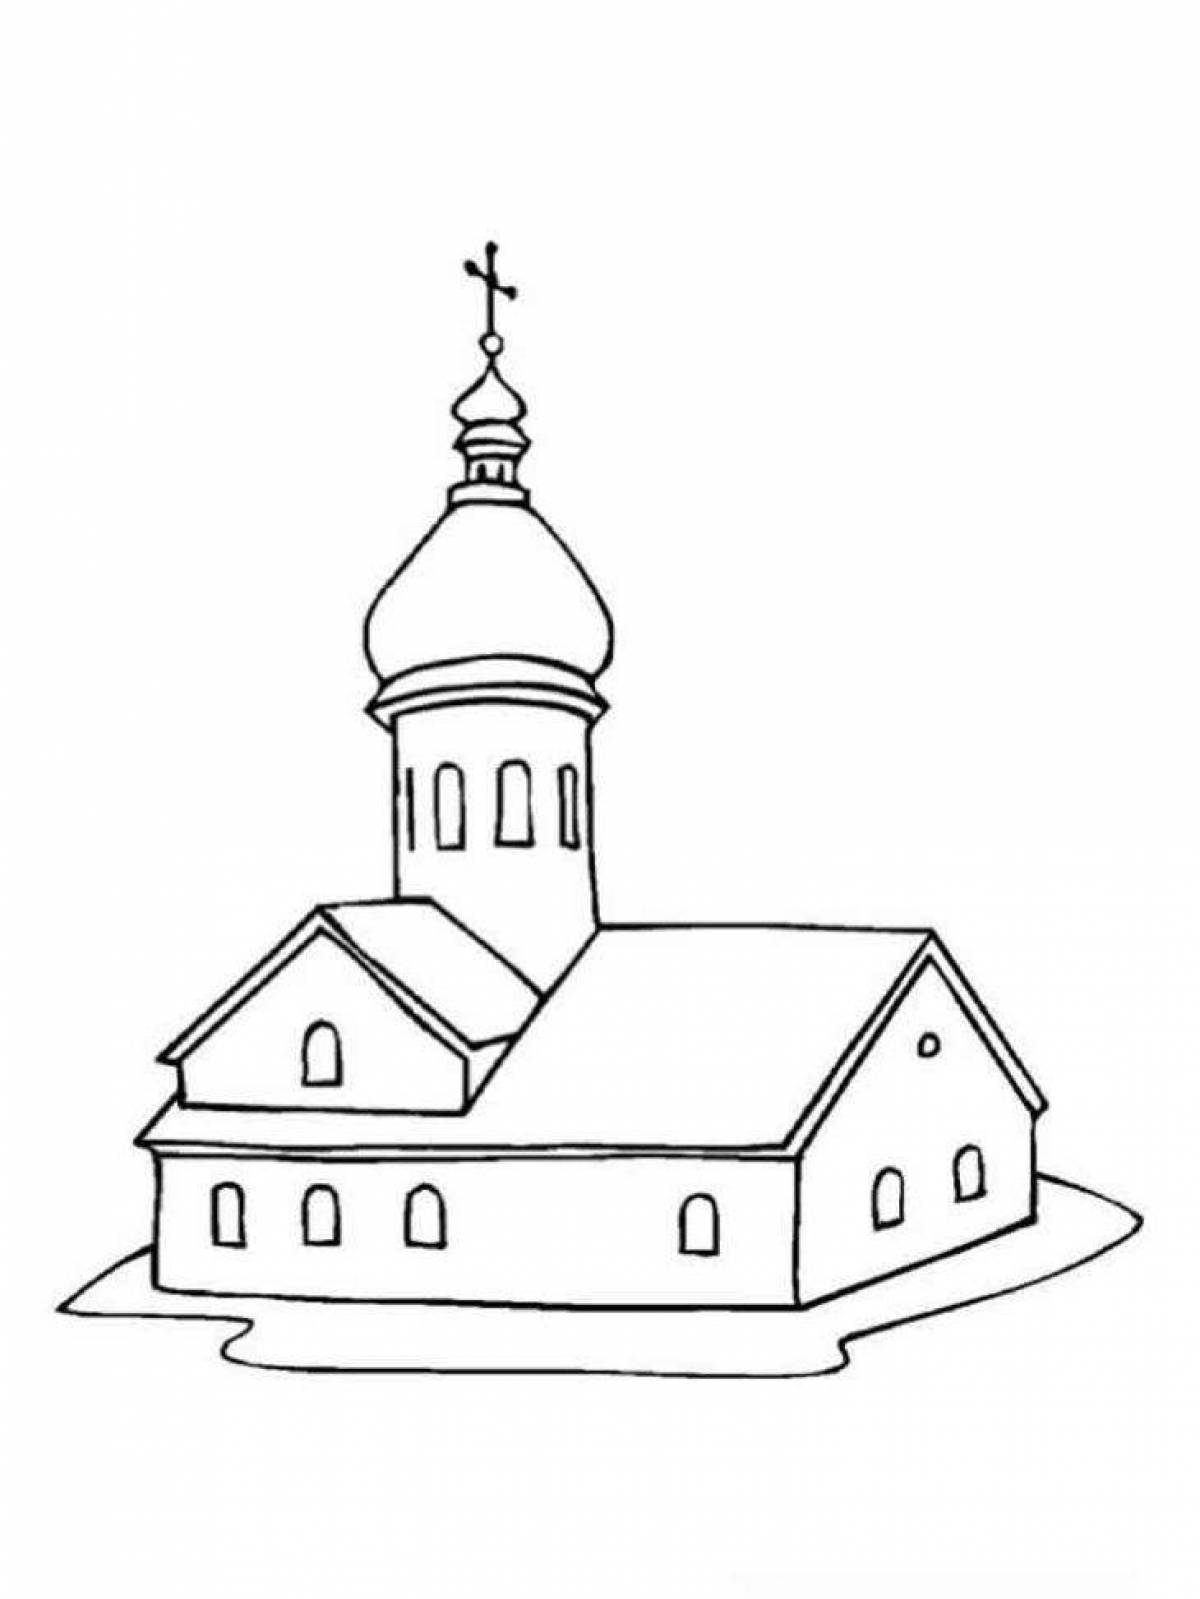 Amazing coloring pages of temples and churches for kids